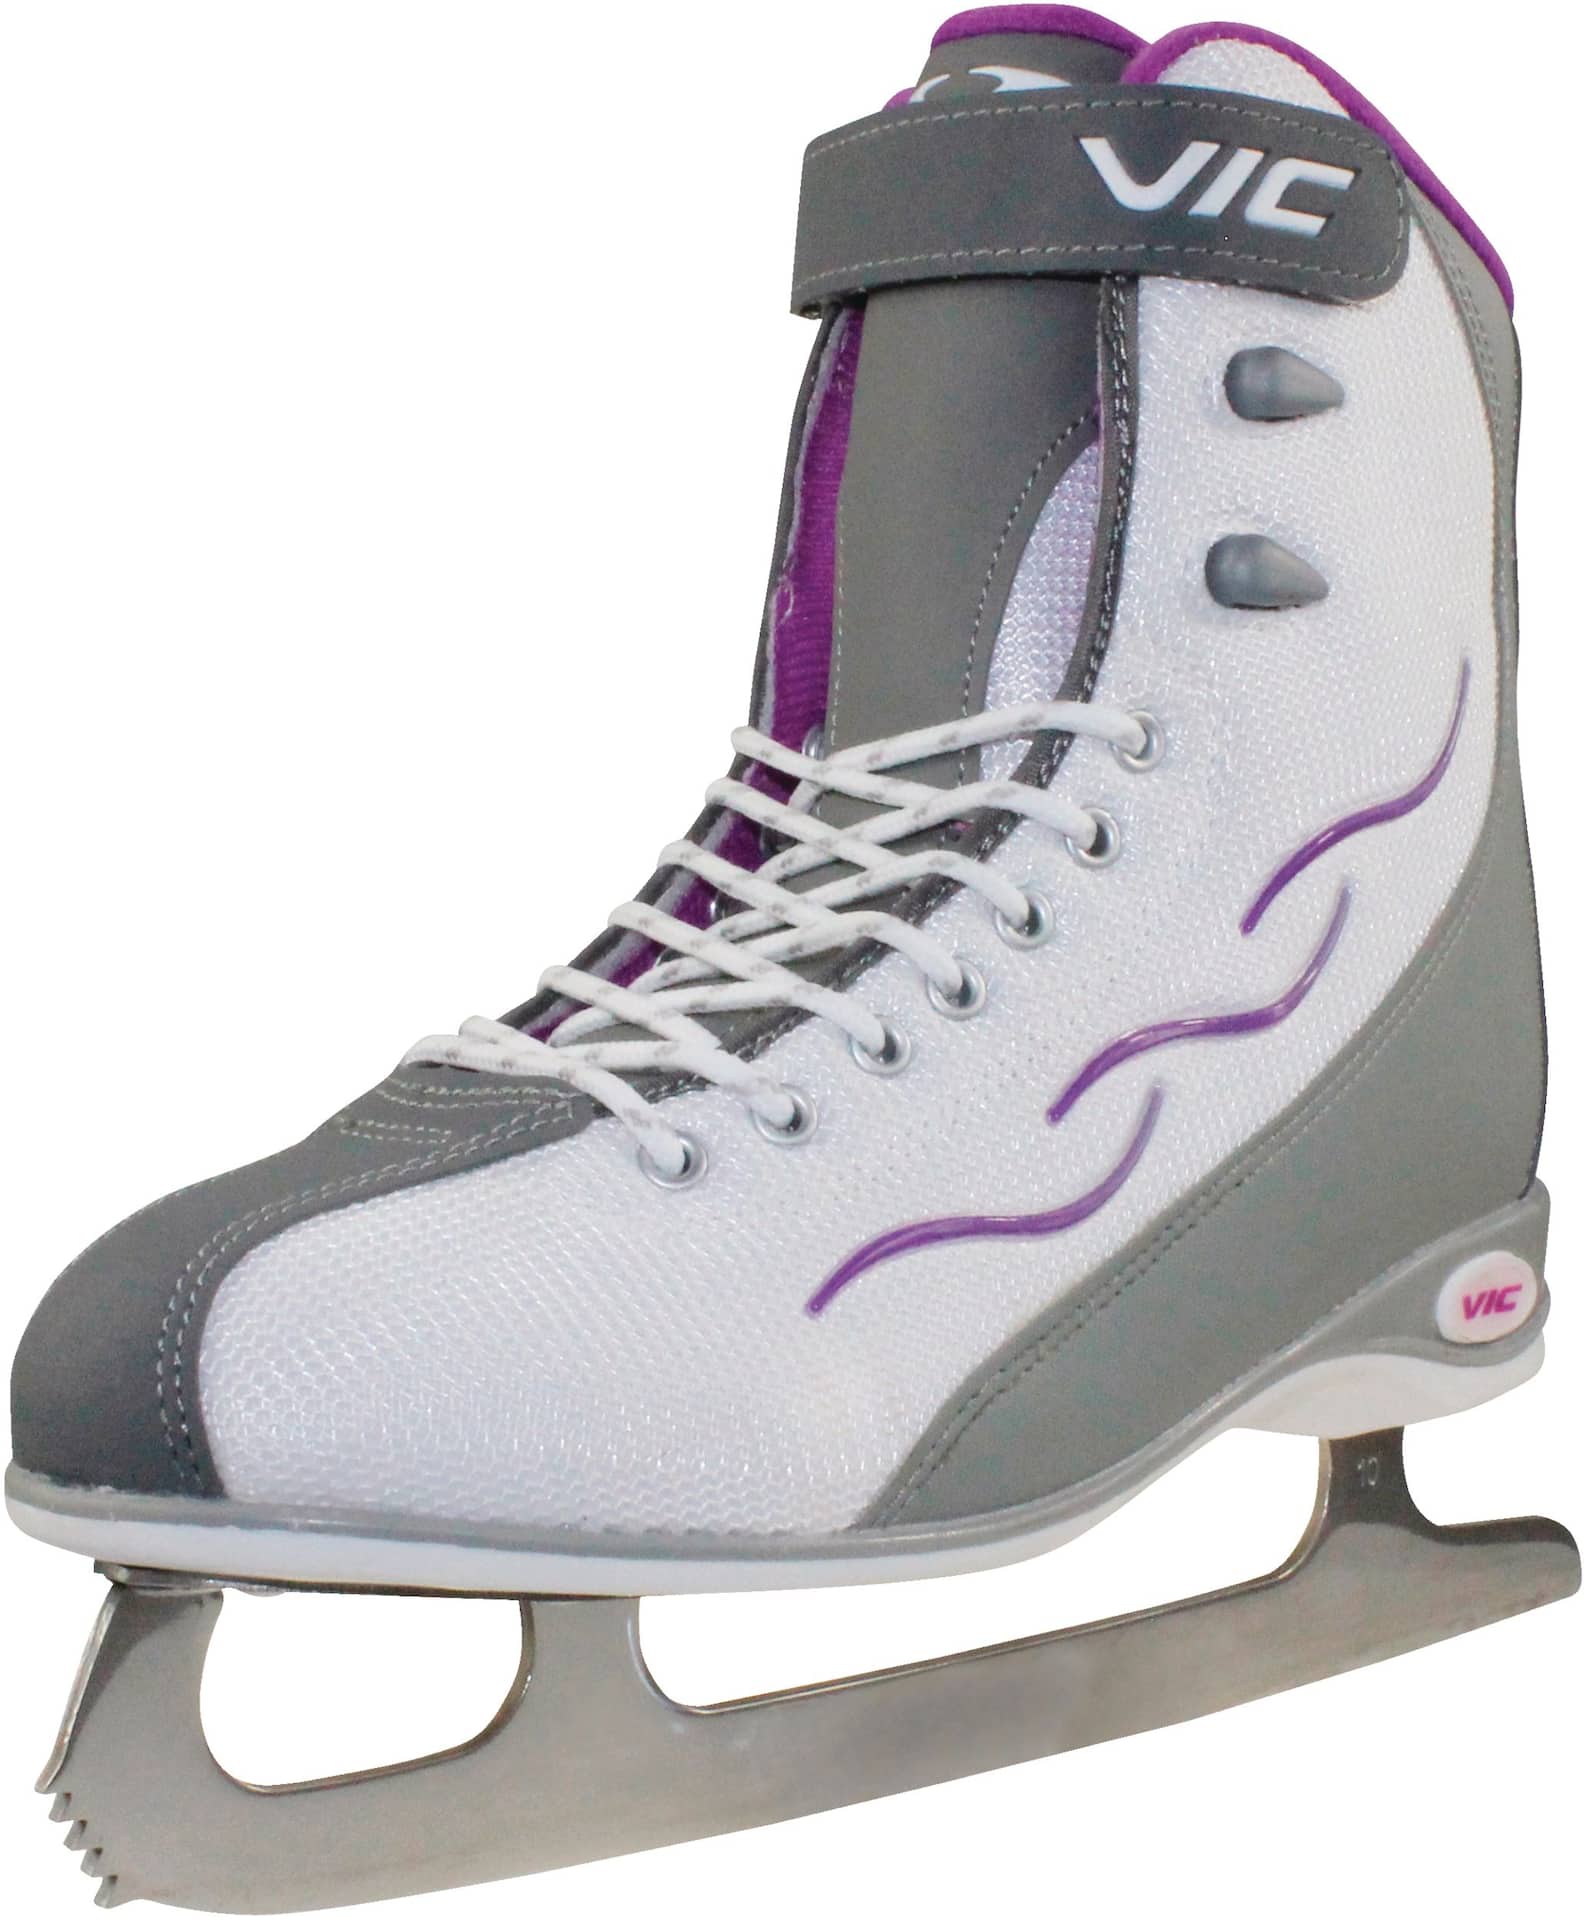 https://media-www.canadiantire.ca/product/playing/hockey/skates/0837994/vic-solair-recreational-skate-lady-size-5-1b6a951b-0584-4a67-9f6c-c0af060a4ed4-jpgrendition.jpg